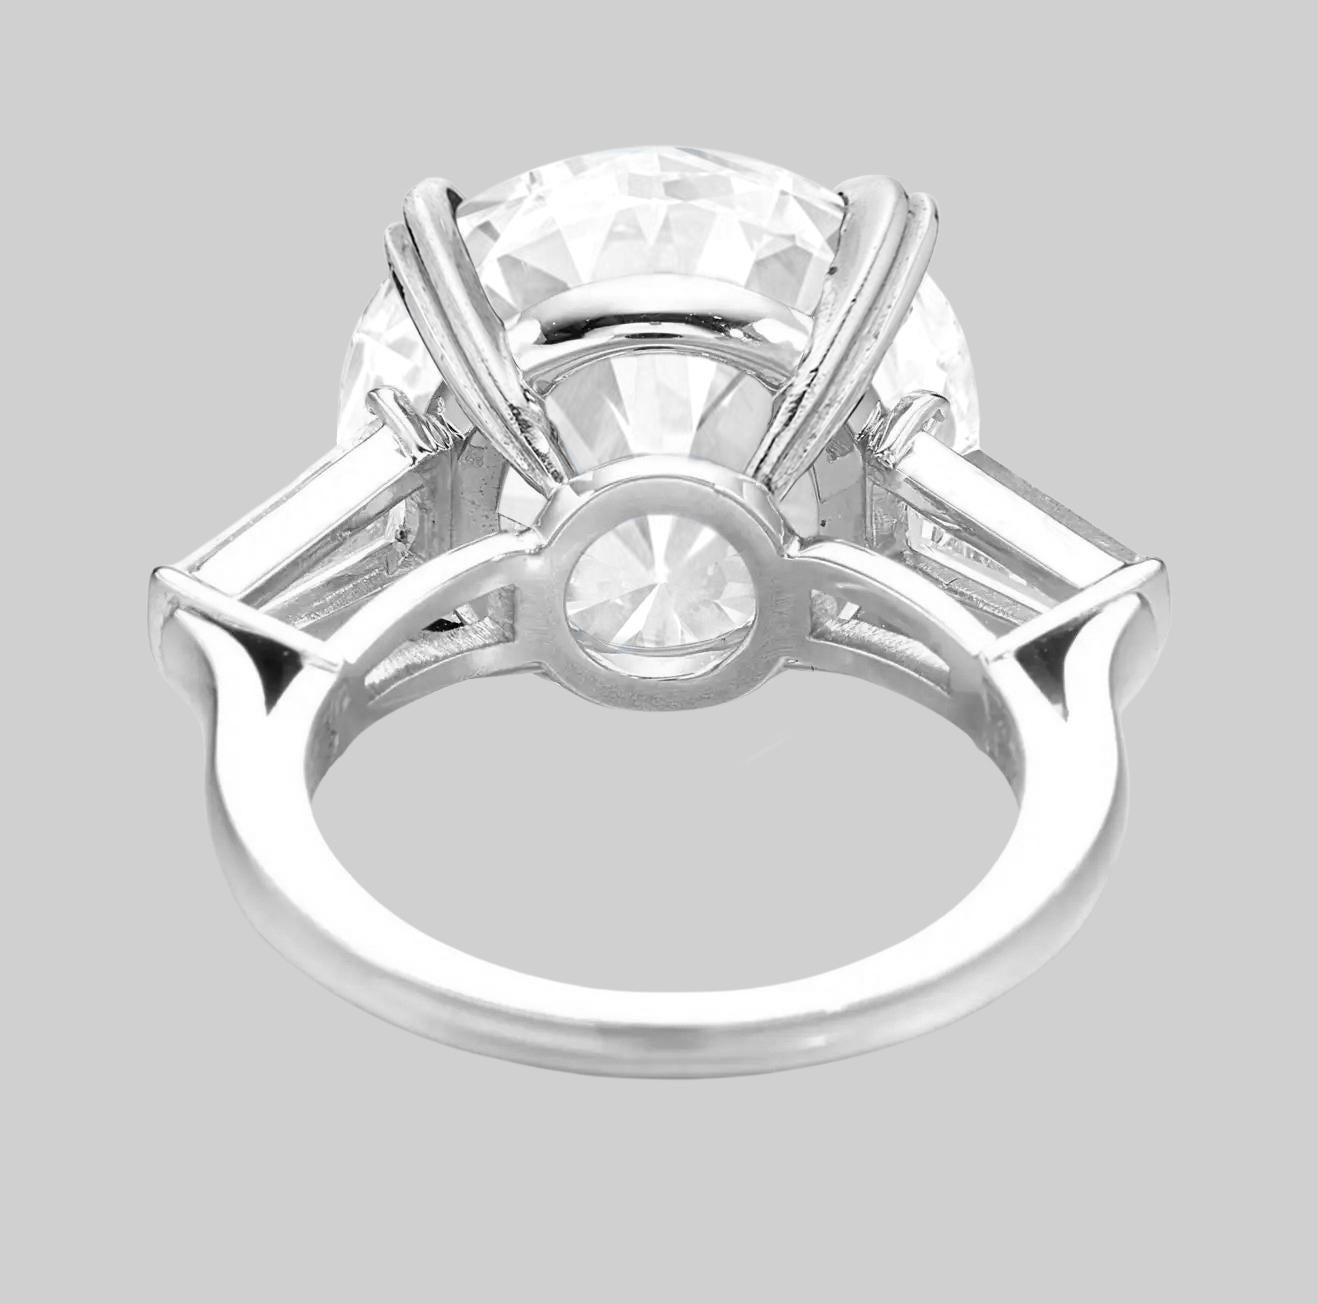 Round Cut GIA Certified 4.50 Carat Round Diamond Platinum Ring Triple Excellent Cut For Sale